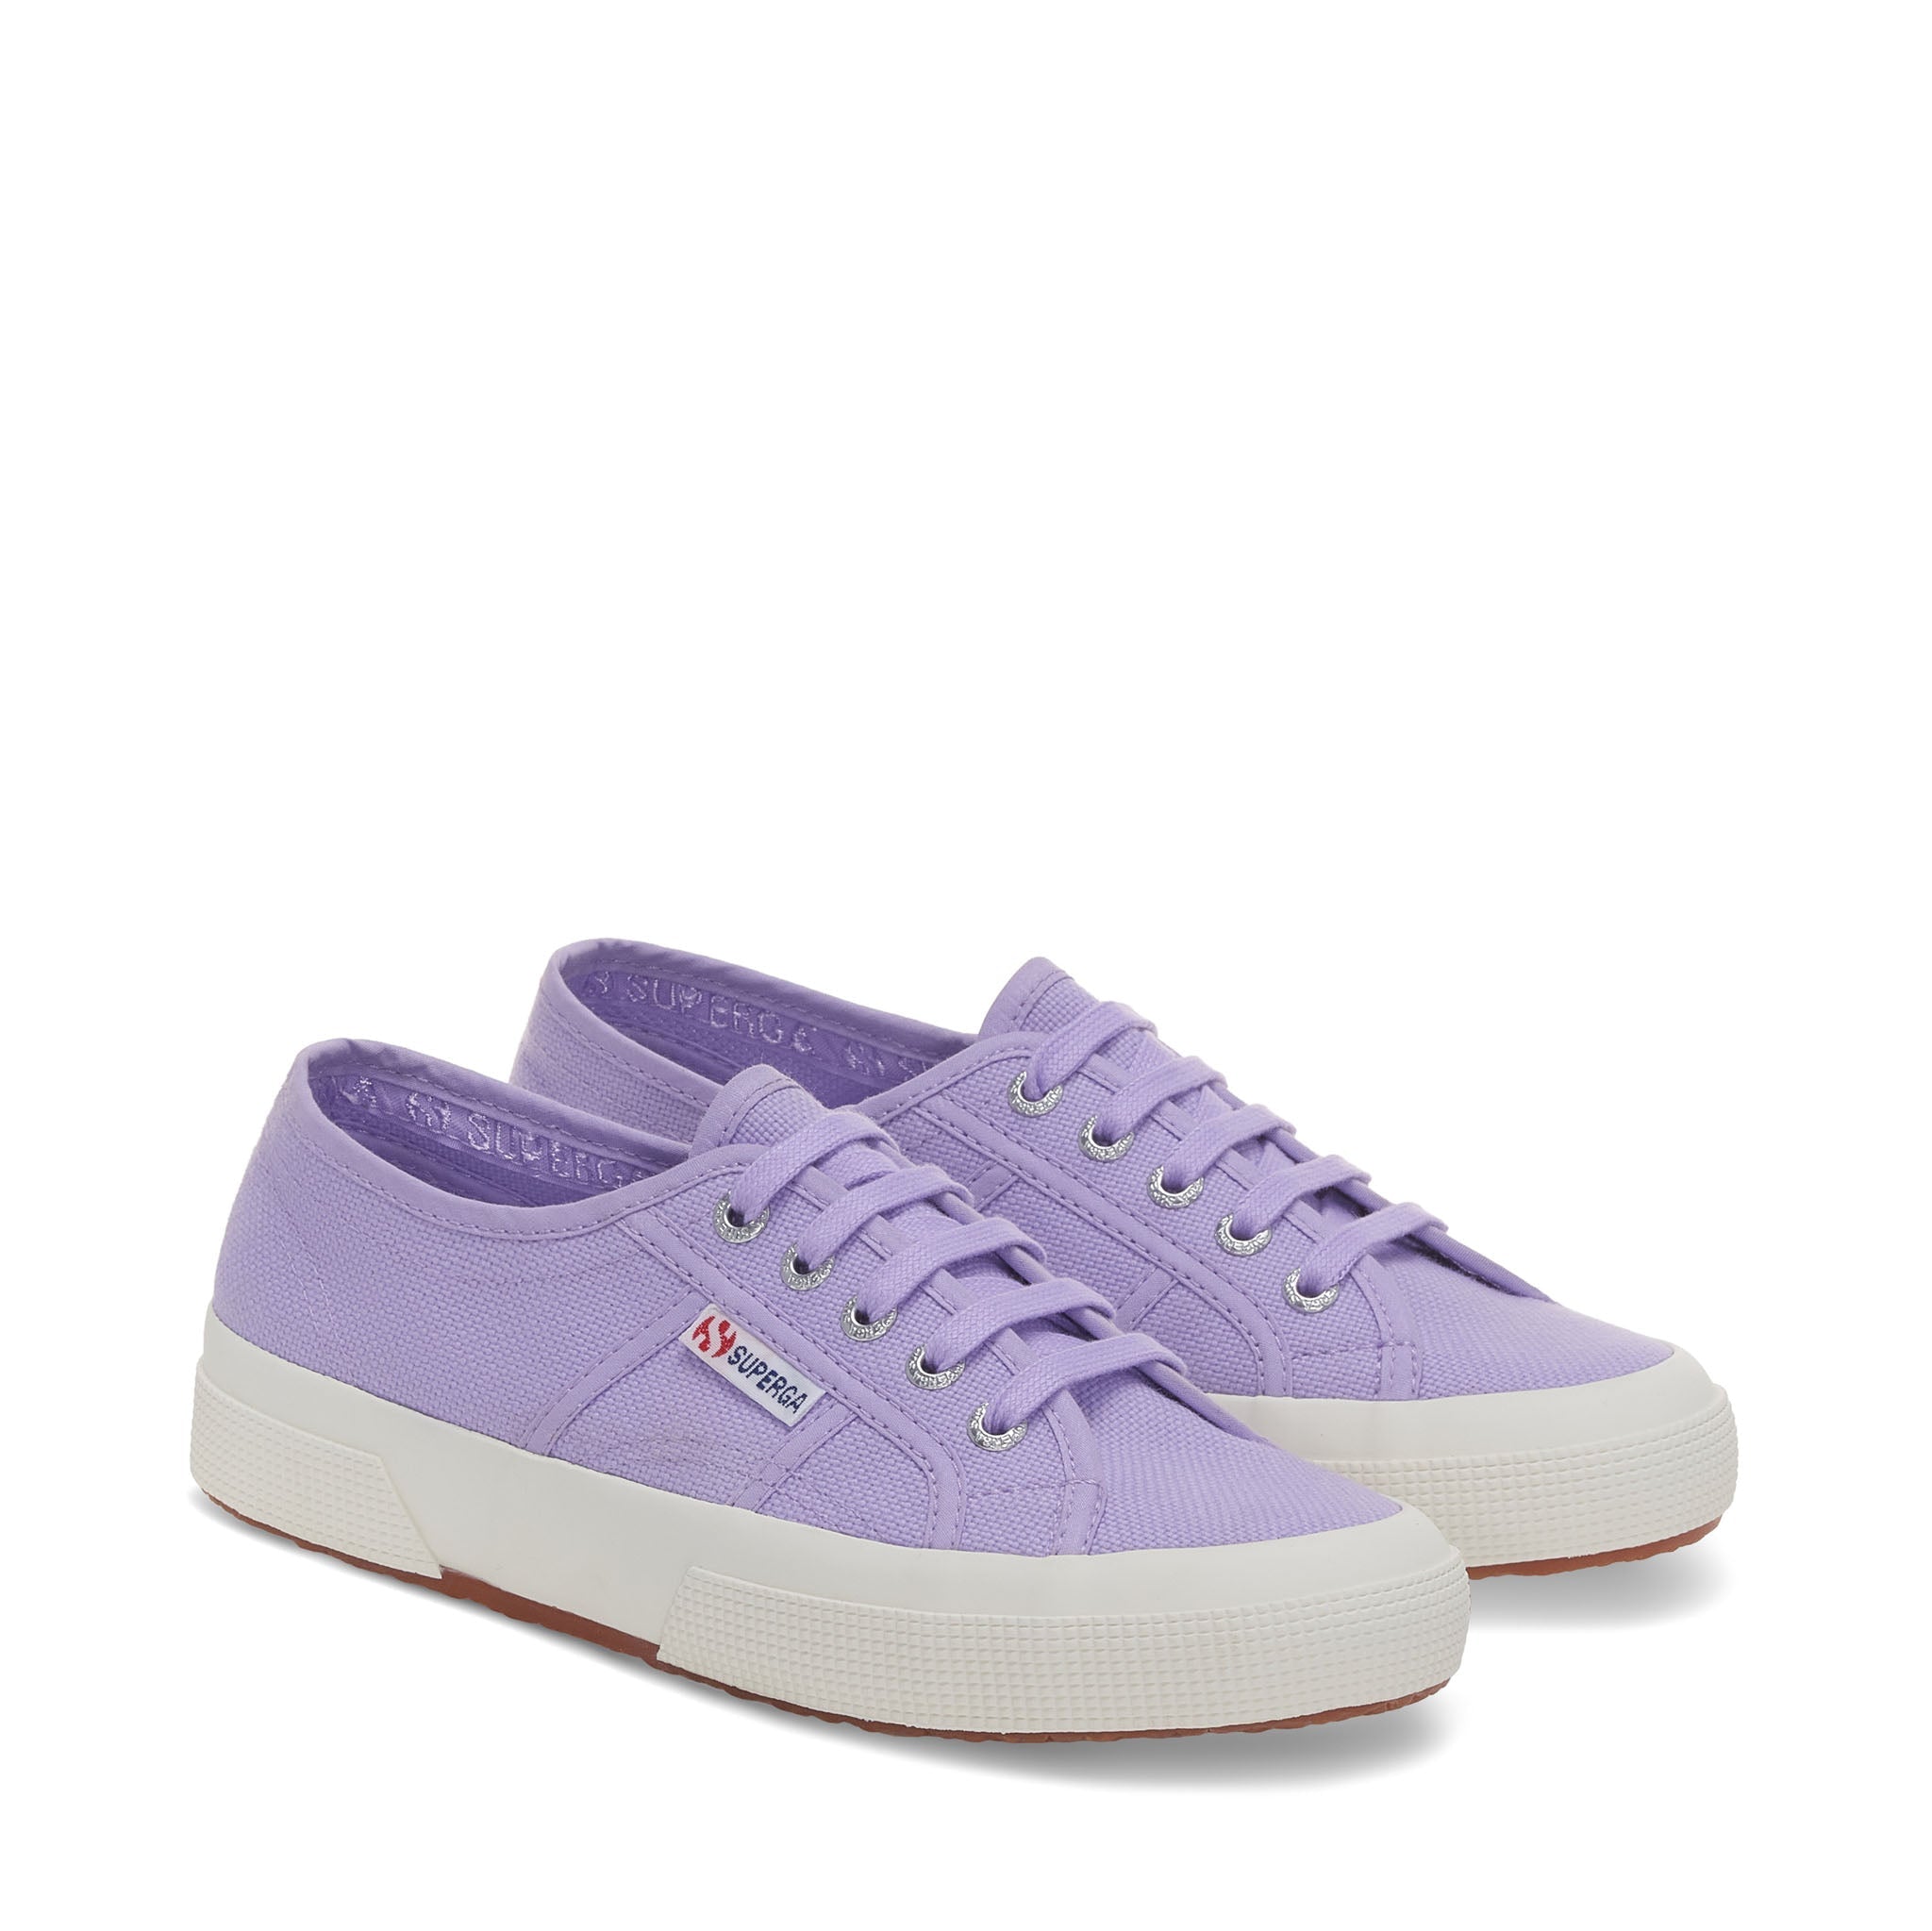 Superga 2750 Cotu Classic Sneakers - Violet. Front view.